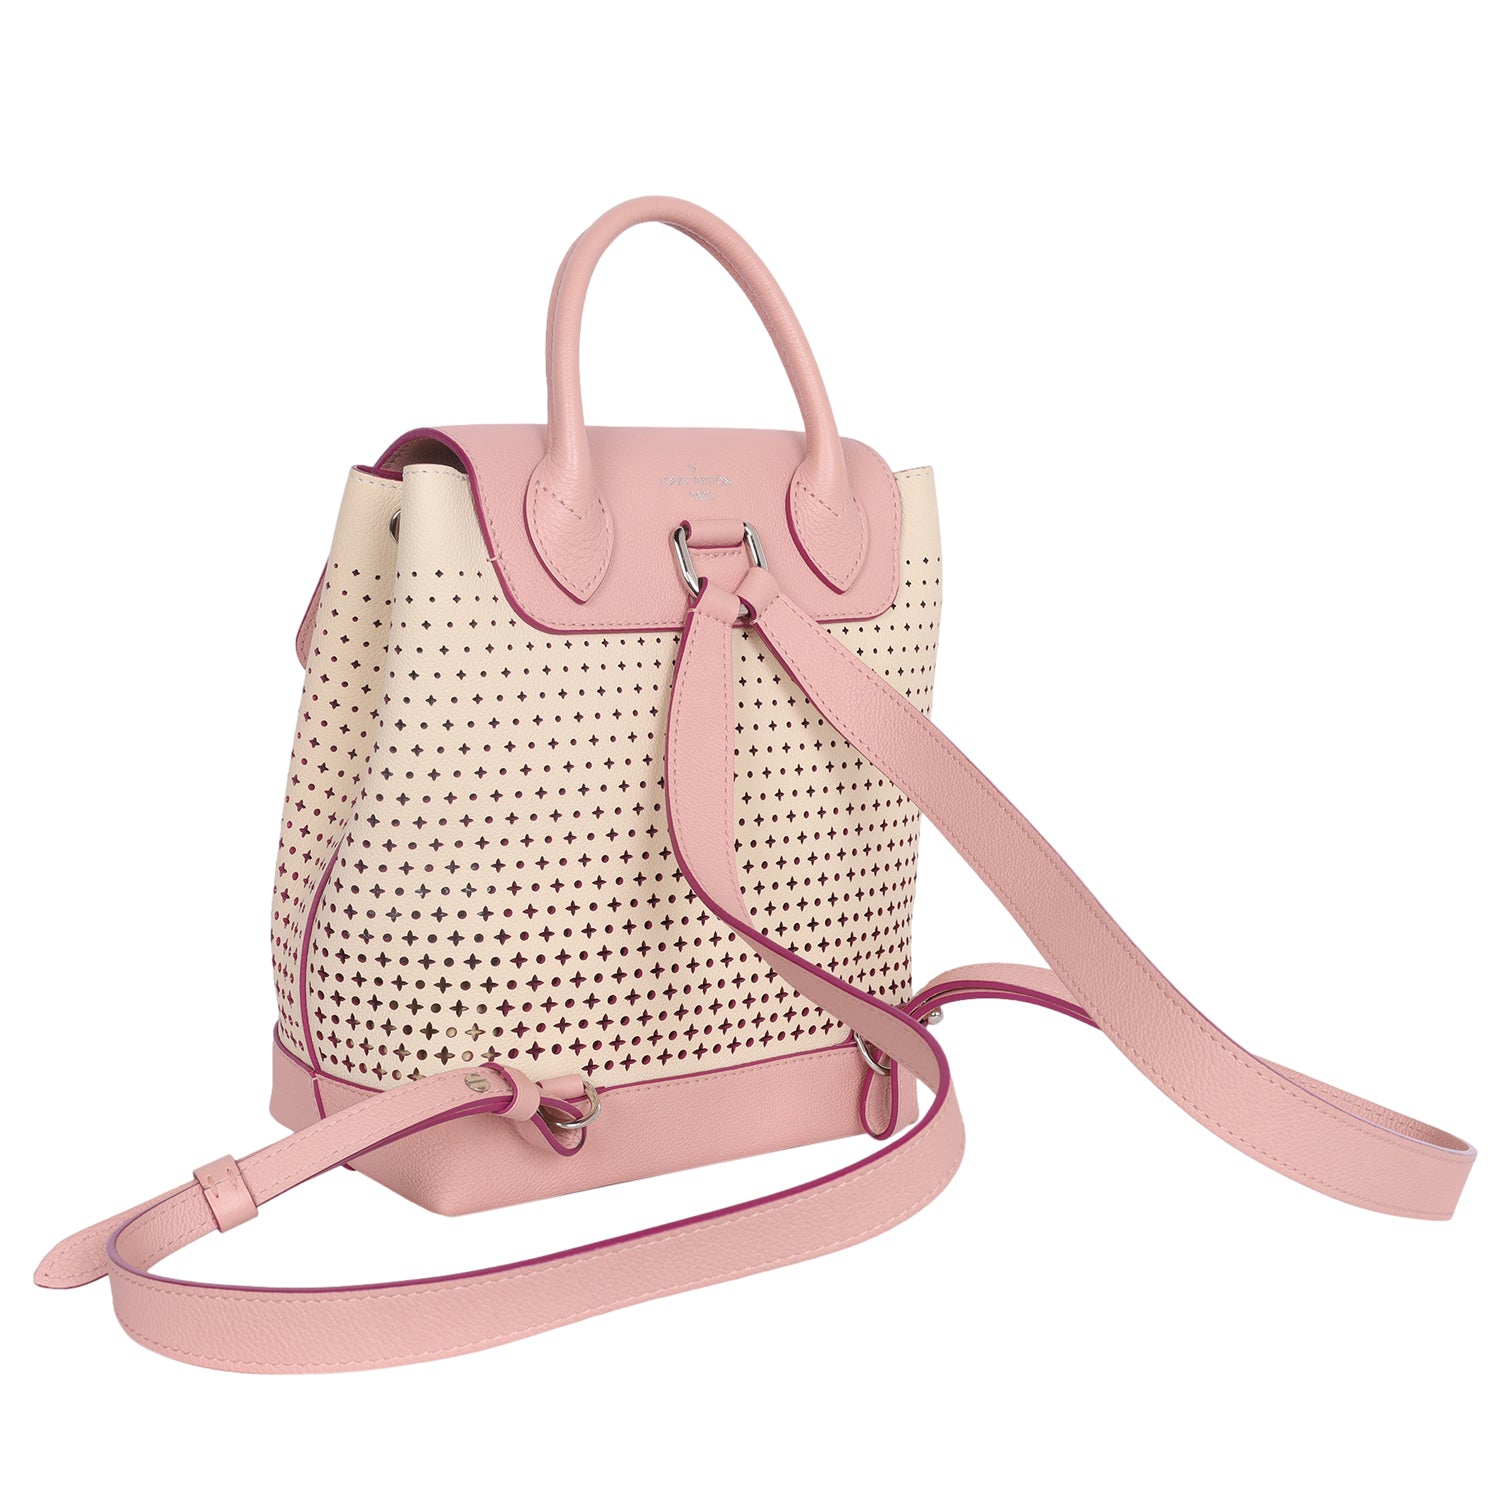 Lockme leather handbag Louis Vuitton Pink in Leather - 28114324